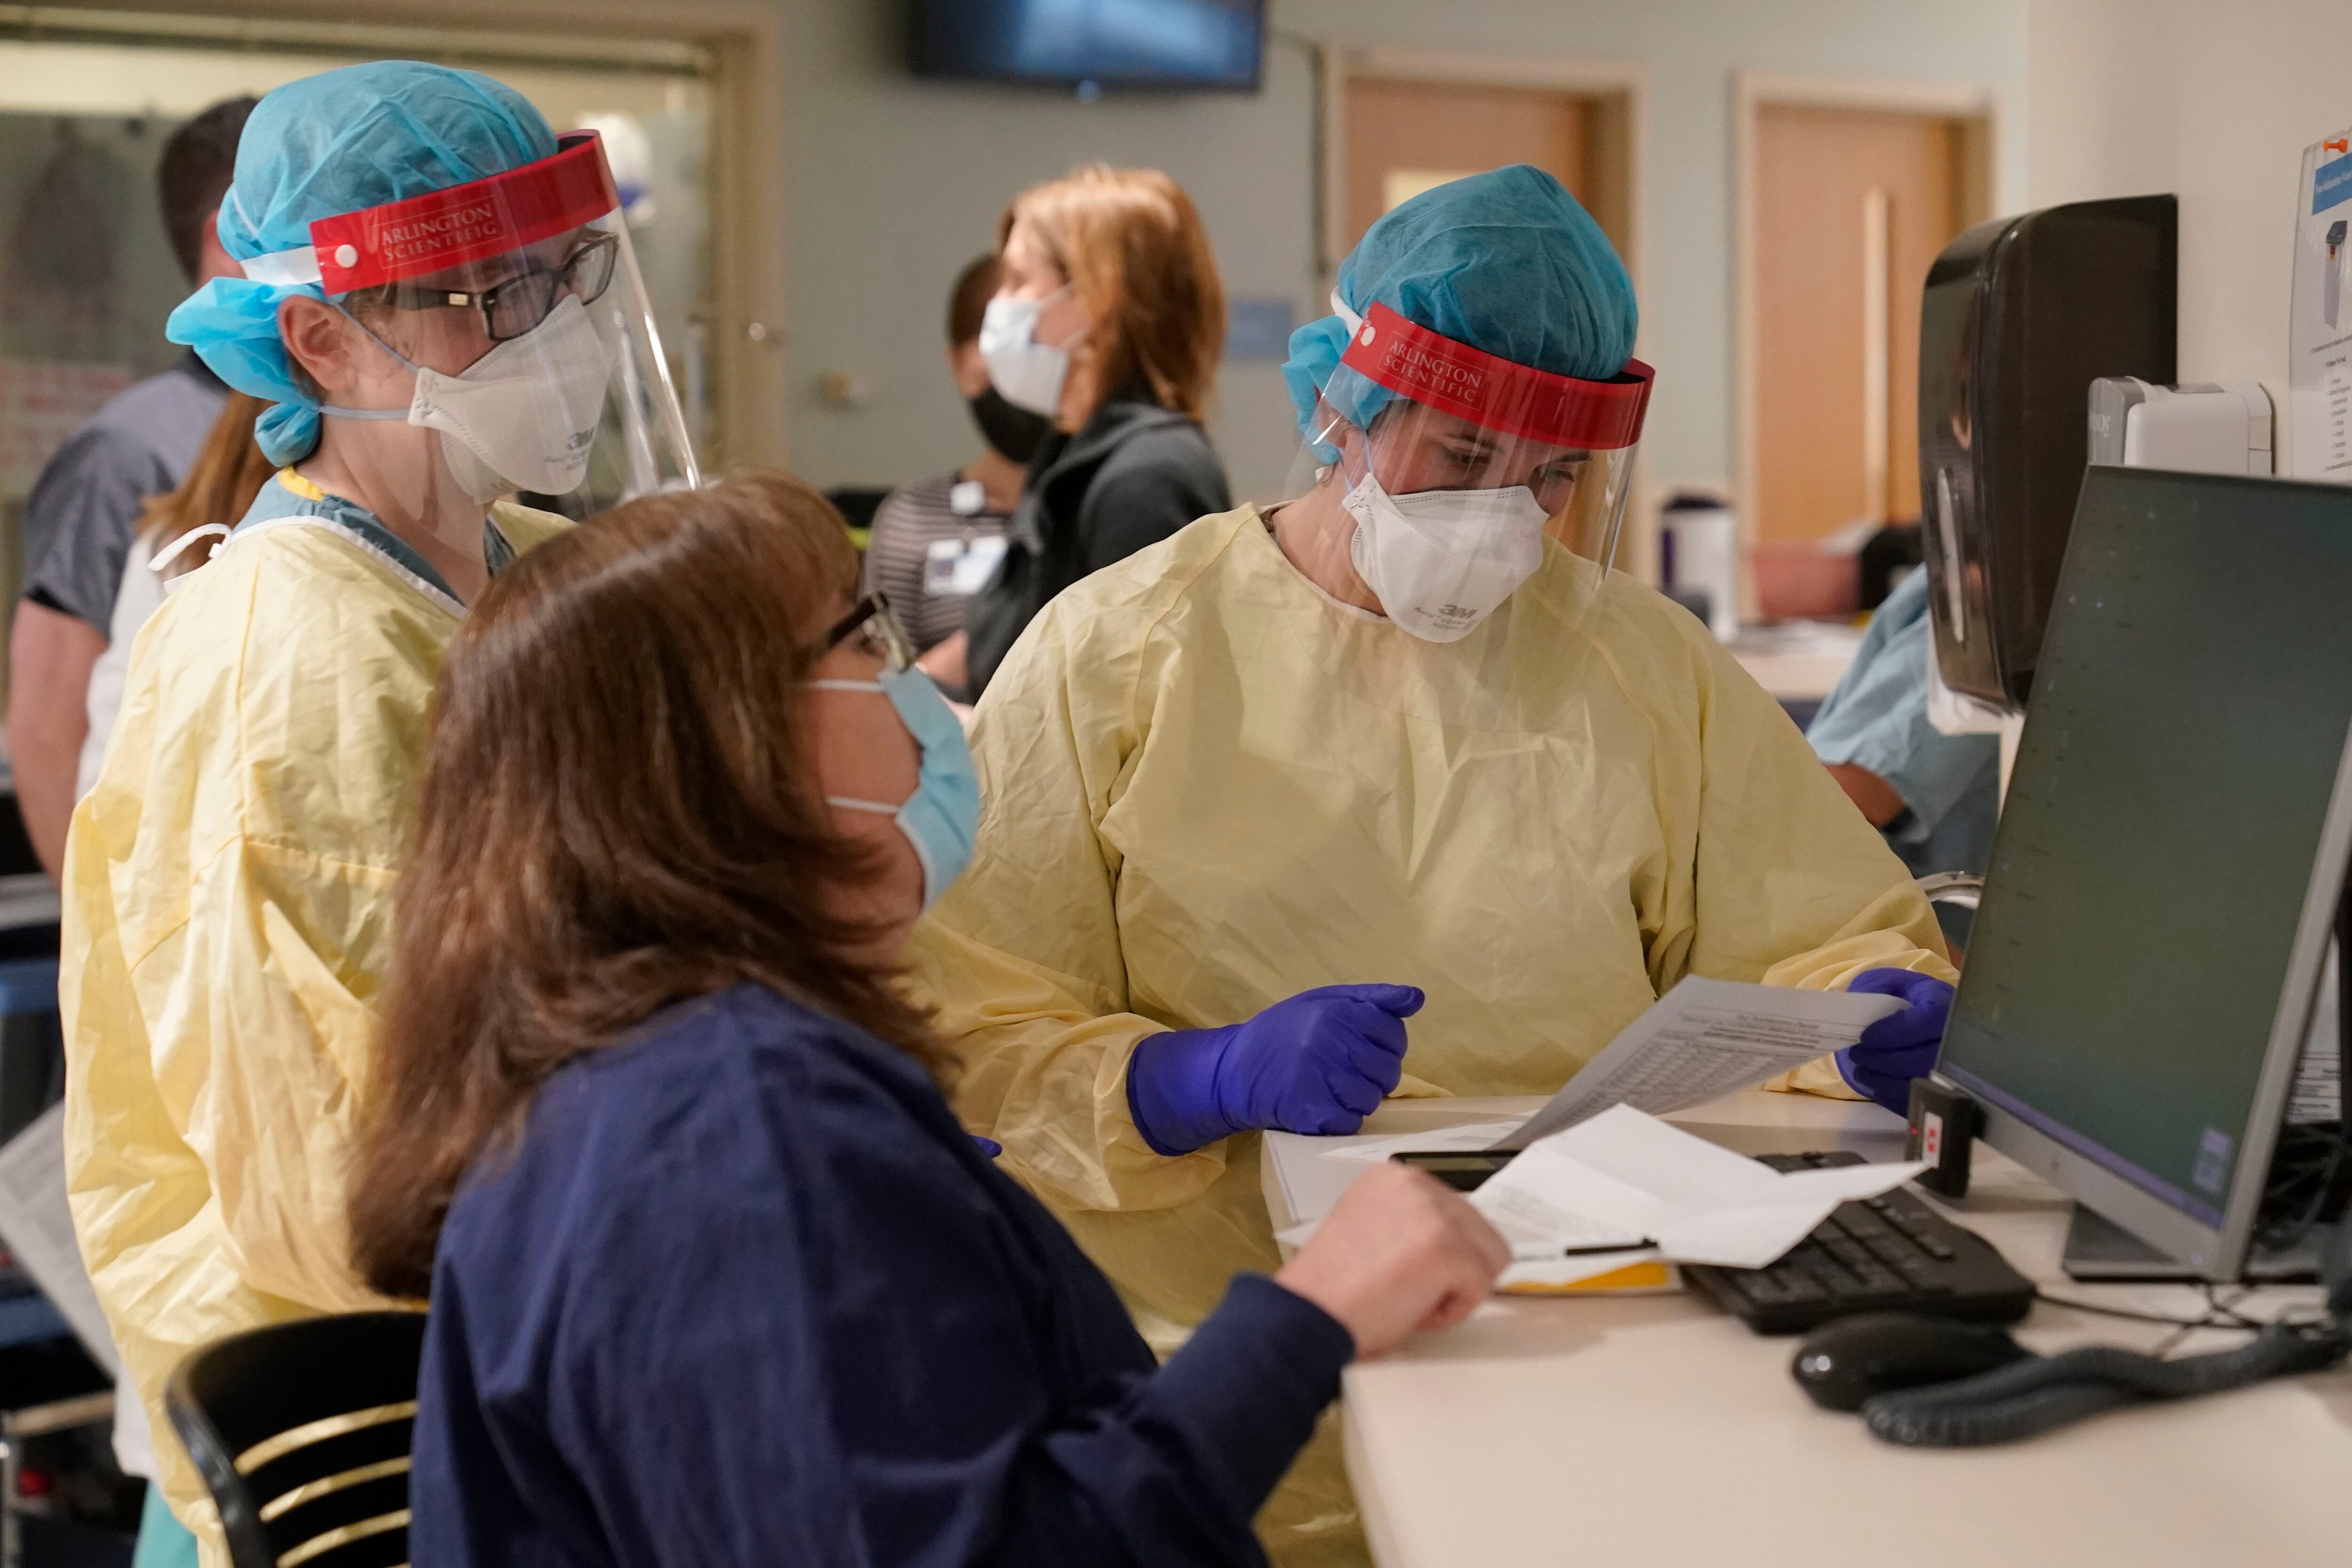 Registered nurses Sarah Carr, top left, and Lindsay Holloran, right, are outfitted in protective gear before entering a patient's room in the COVID-19 Intensive Care Unit at Dartmouth-Hitchcock Medical Center , in Lebanon.  (Photo: AP / Steven Senne)